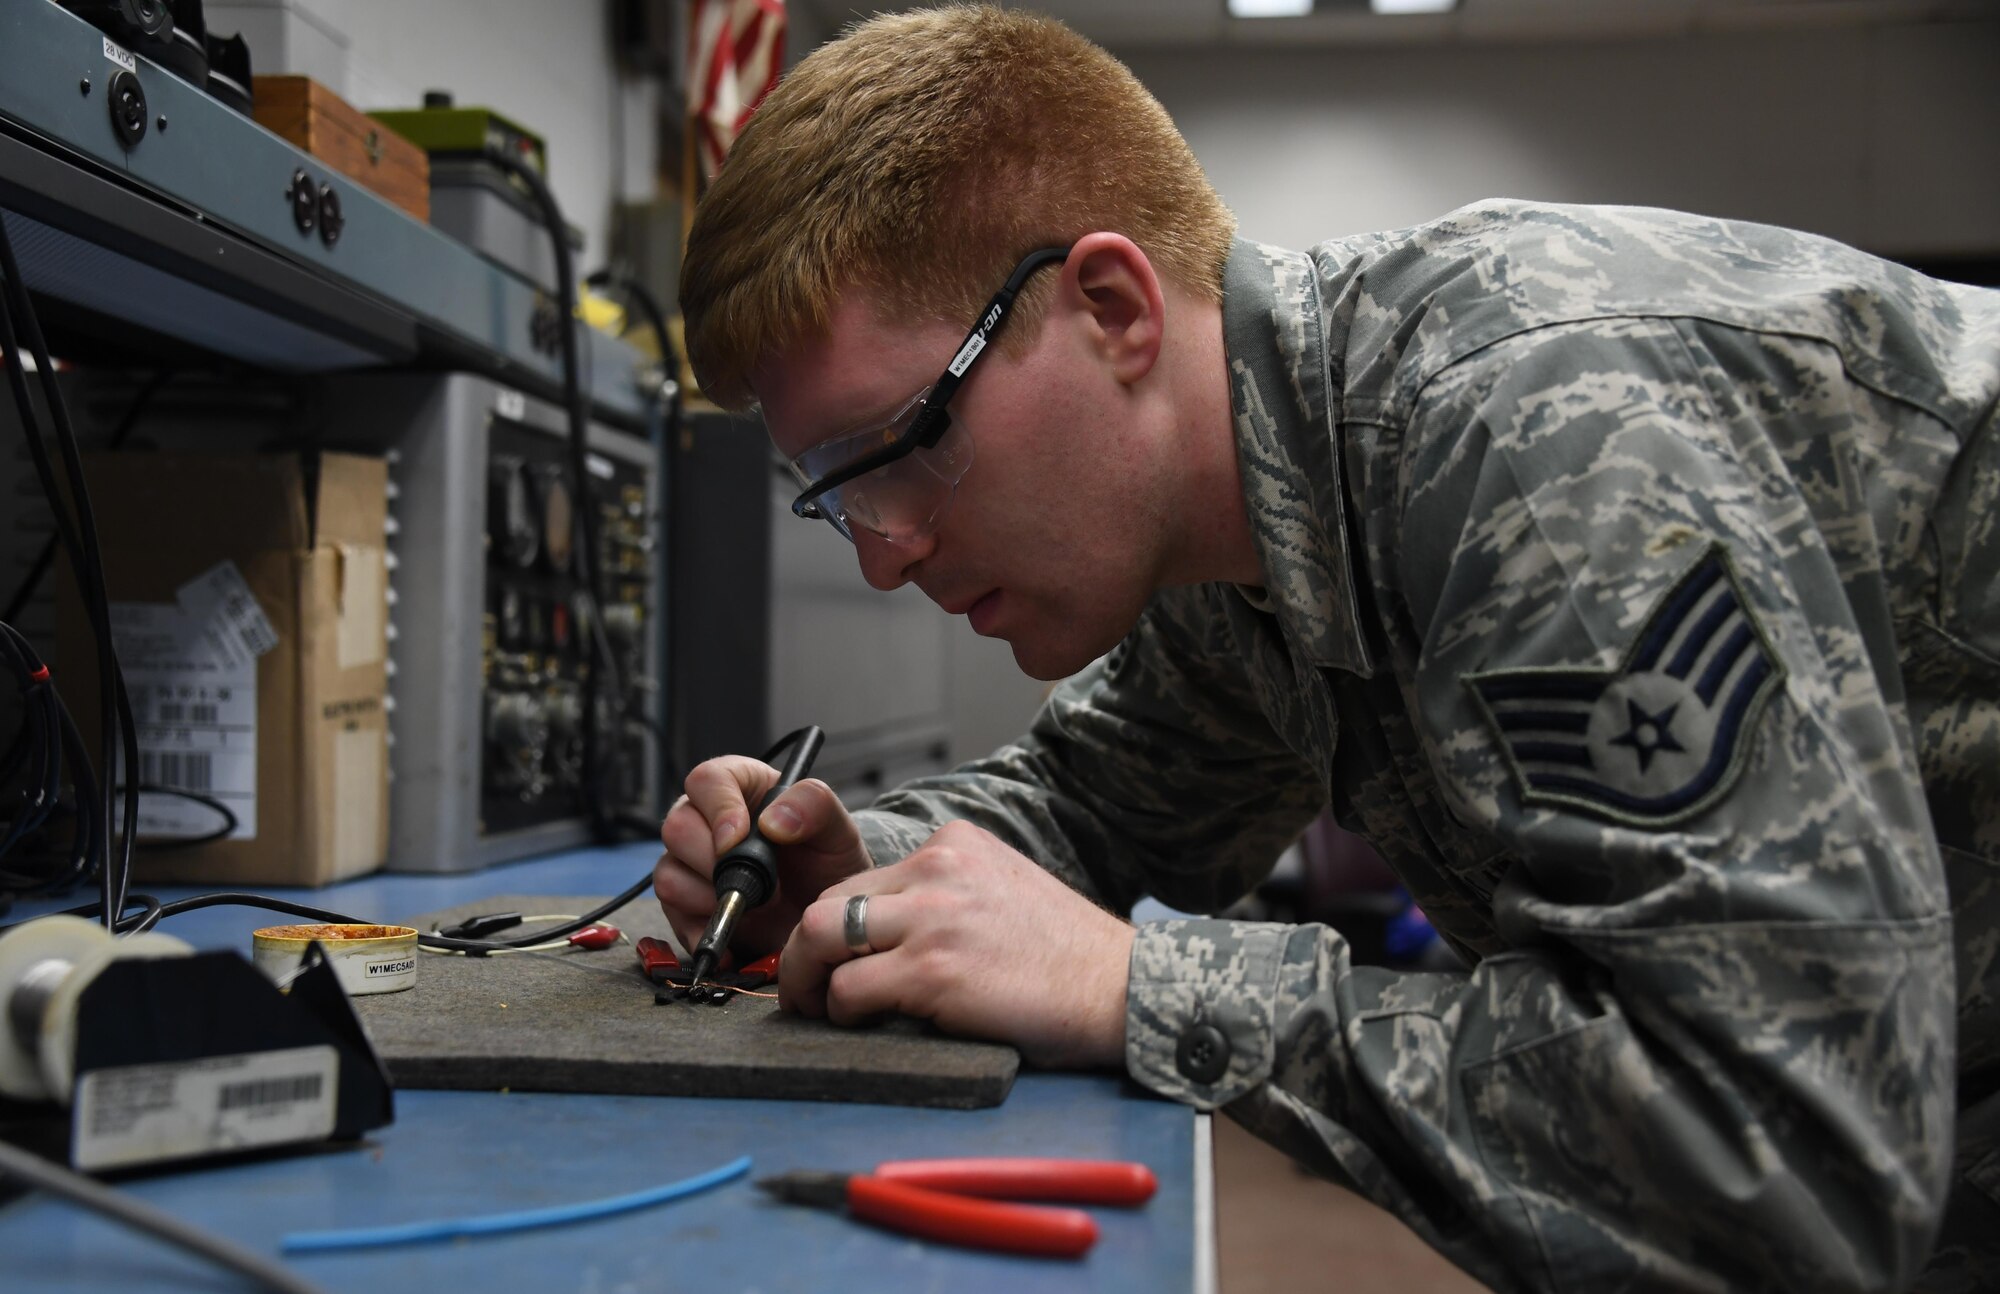 Staff Sgt. Kevin Mulhollen, aircraft electrical and environmental technician with the 911th Aircraft Maintenance Squadron, repairs a test jumper at the Pittsburgh International Airport Air Reserve Station, Dec. 4, 2016. A test jumper connects two wires to perform operational checks and troubleshooting of newly replaced or broken parts. (U.S. Air Force photo by Staff Sgt. Marjorie A. Bowlden)